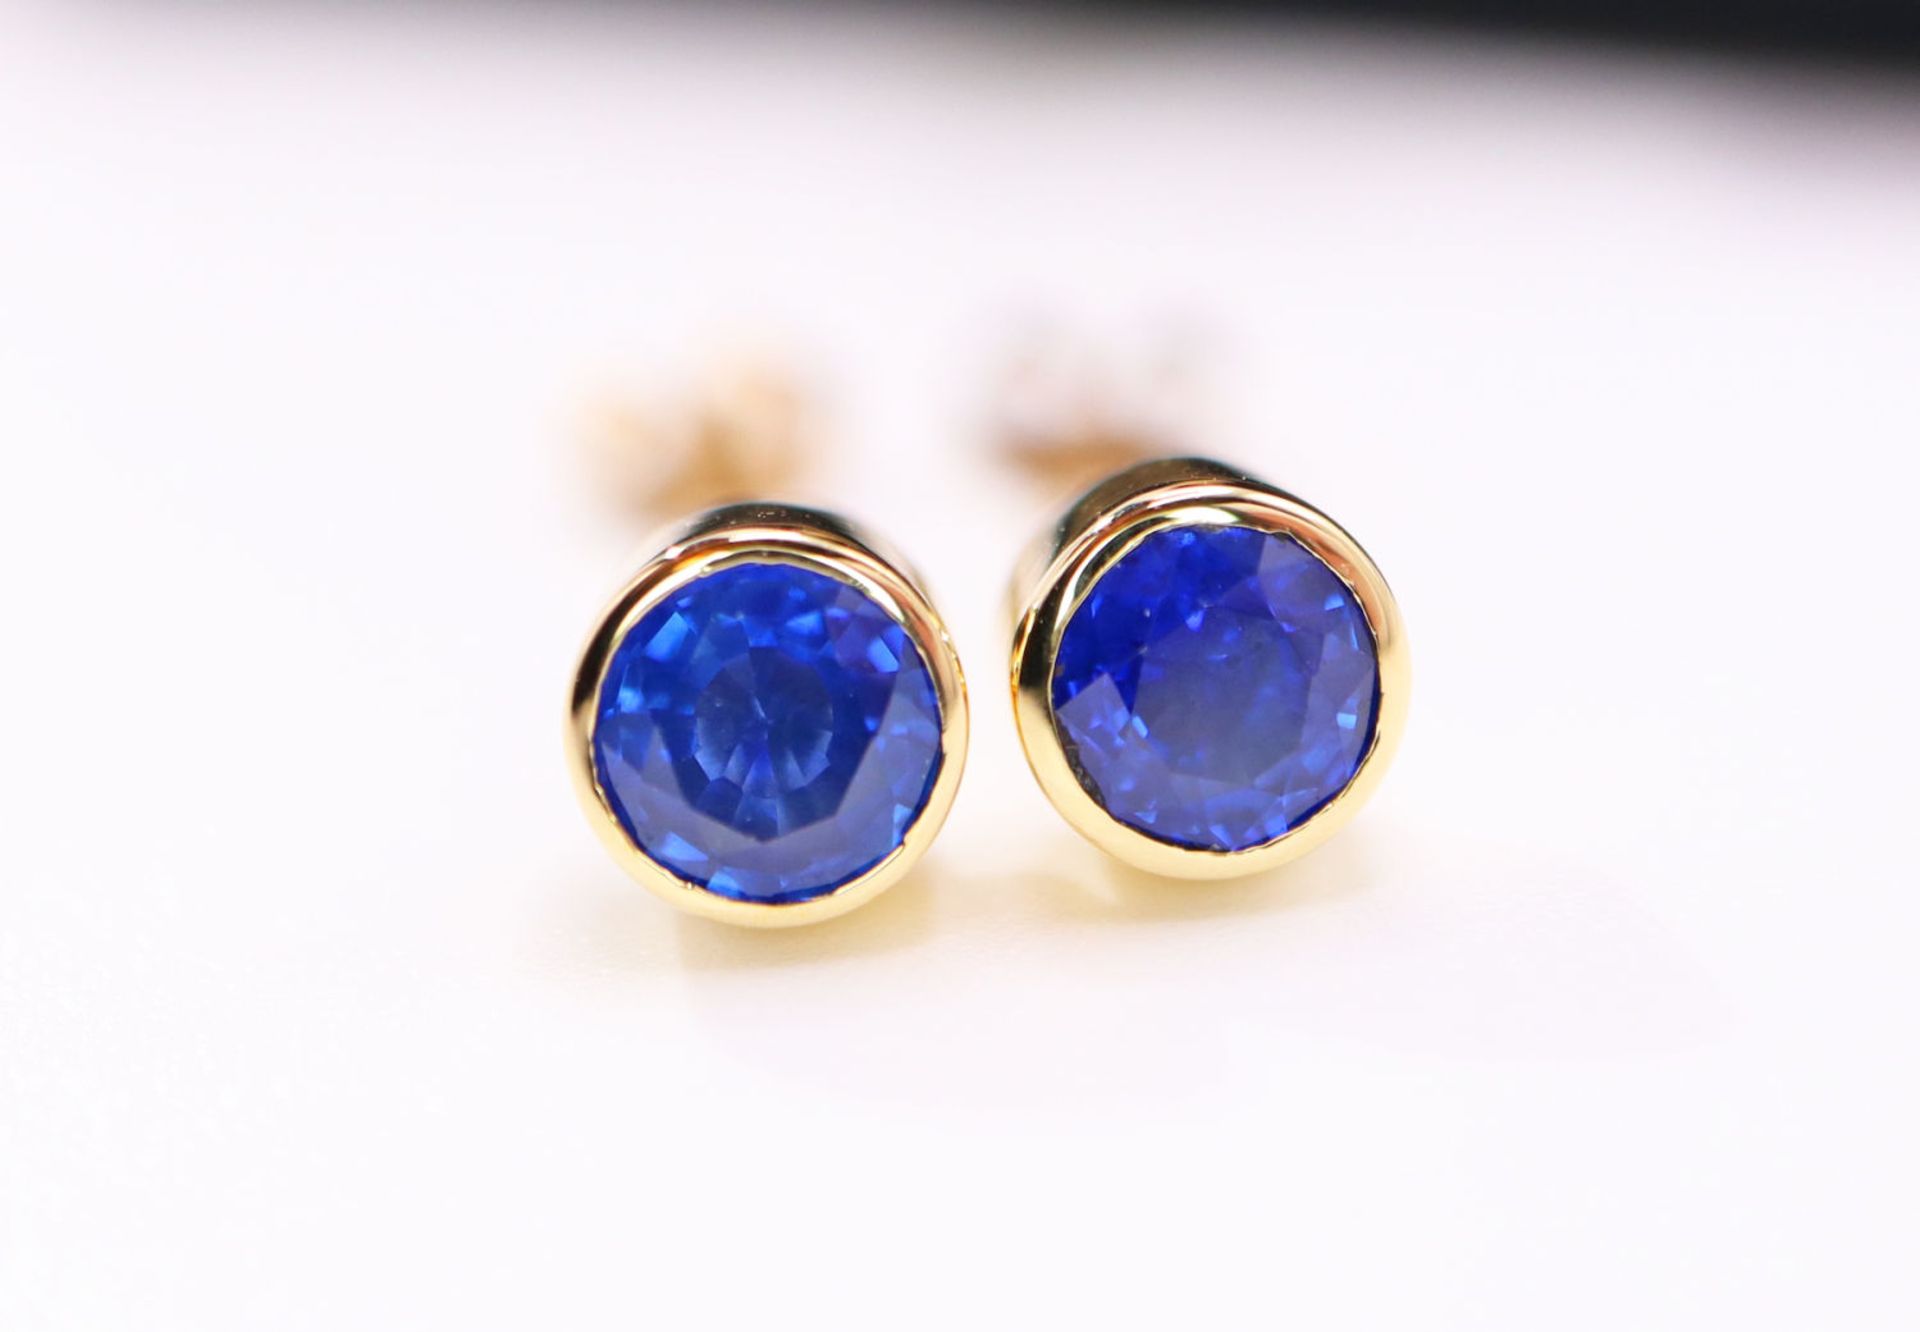 *BEAUTIFUL* 1.30CT BRIGHT BLUE SAPPHIRE STUD EARRINGS SET IN 18K YELLOW GOLD - Image 2 of 4